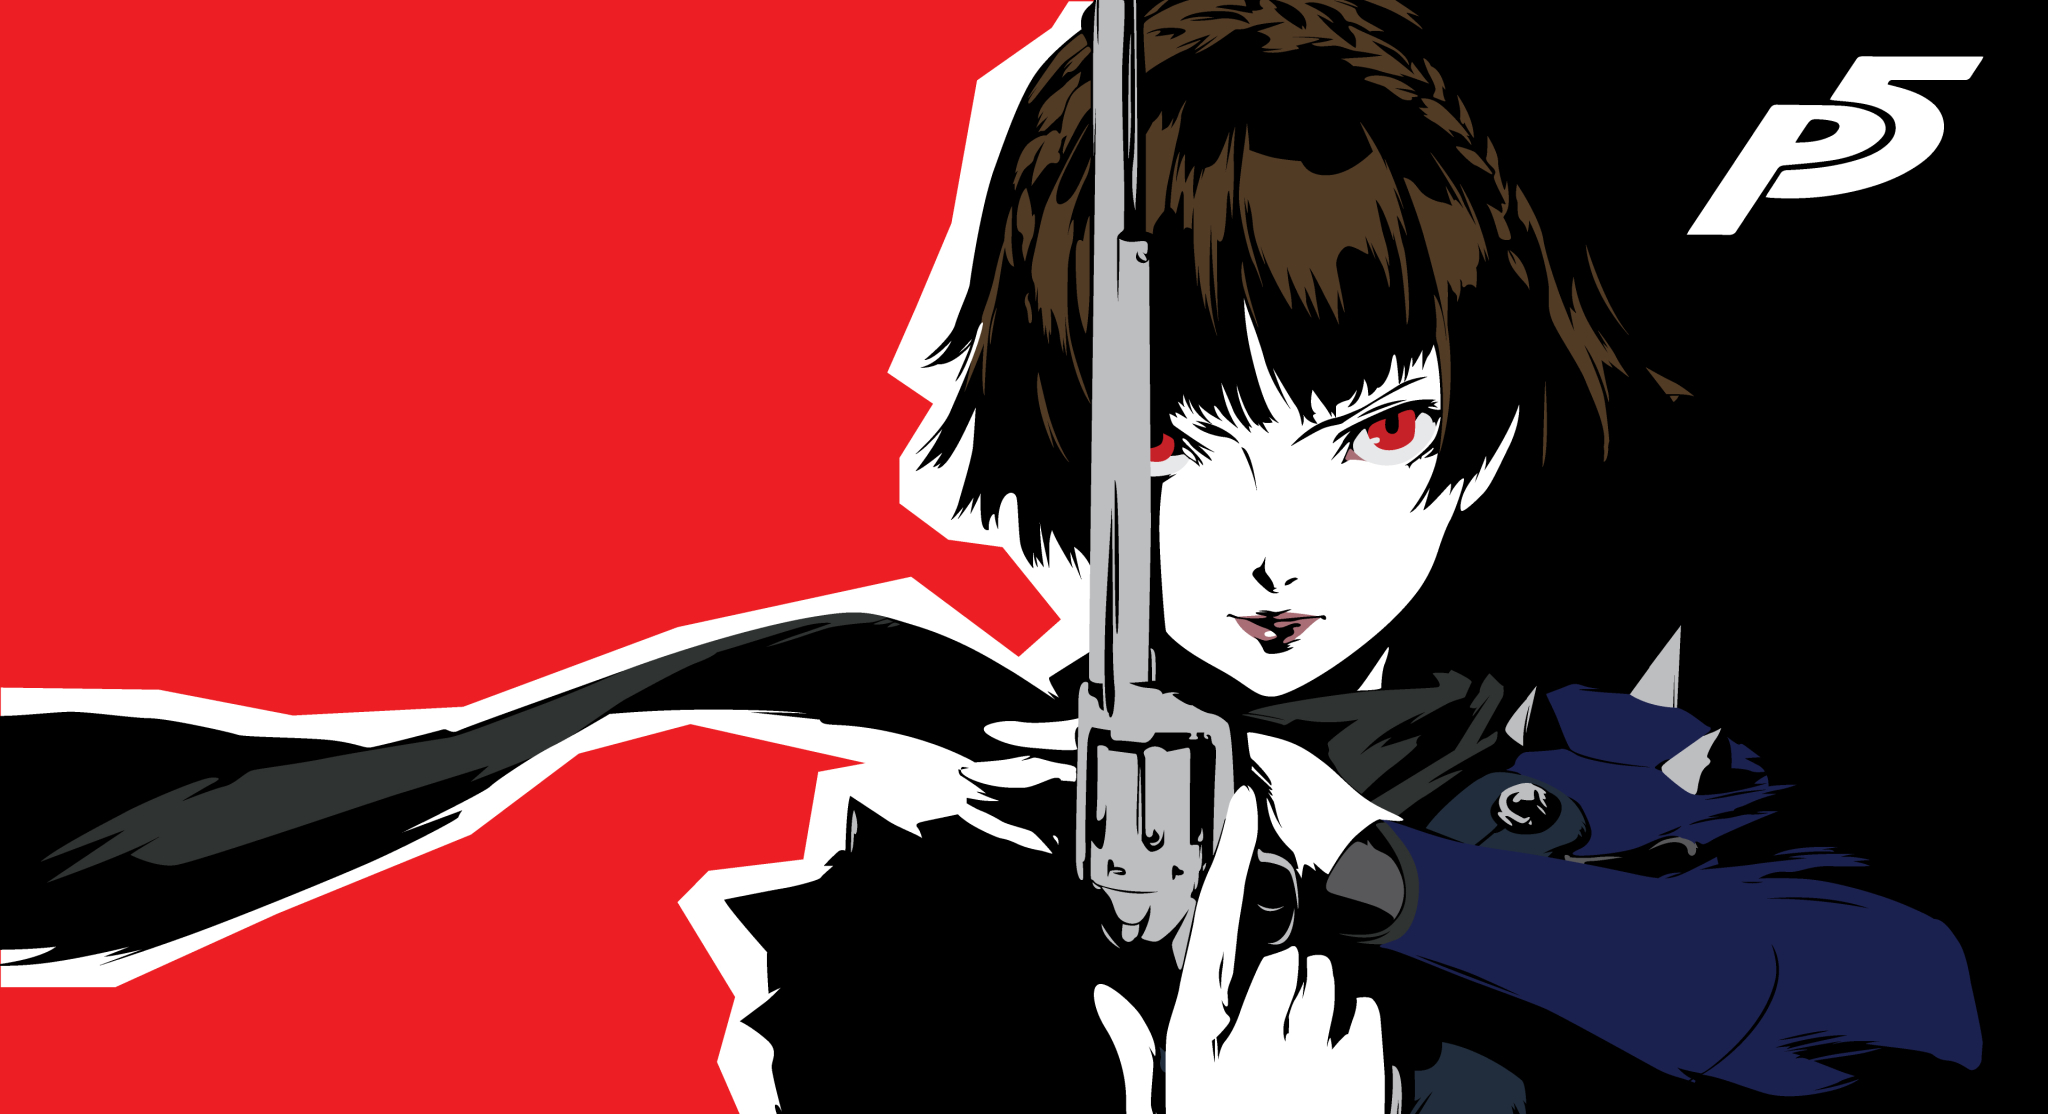 2048x1114 Resolution Queen Persona 5 Anime Girl 4K 2048x1114 Resolution ...